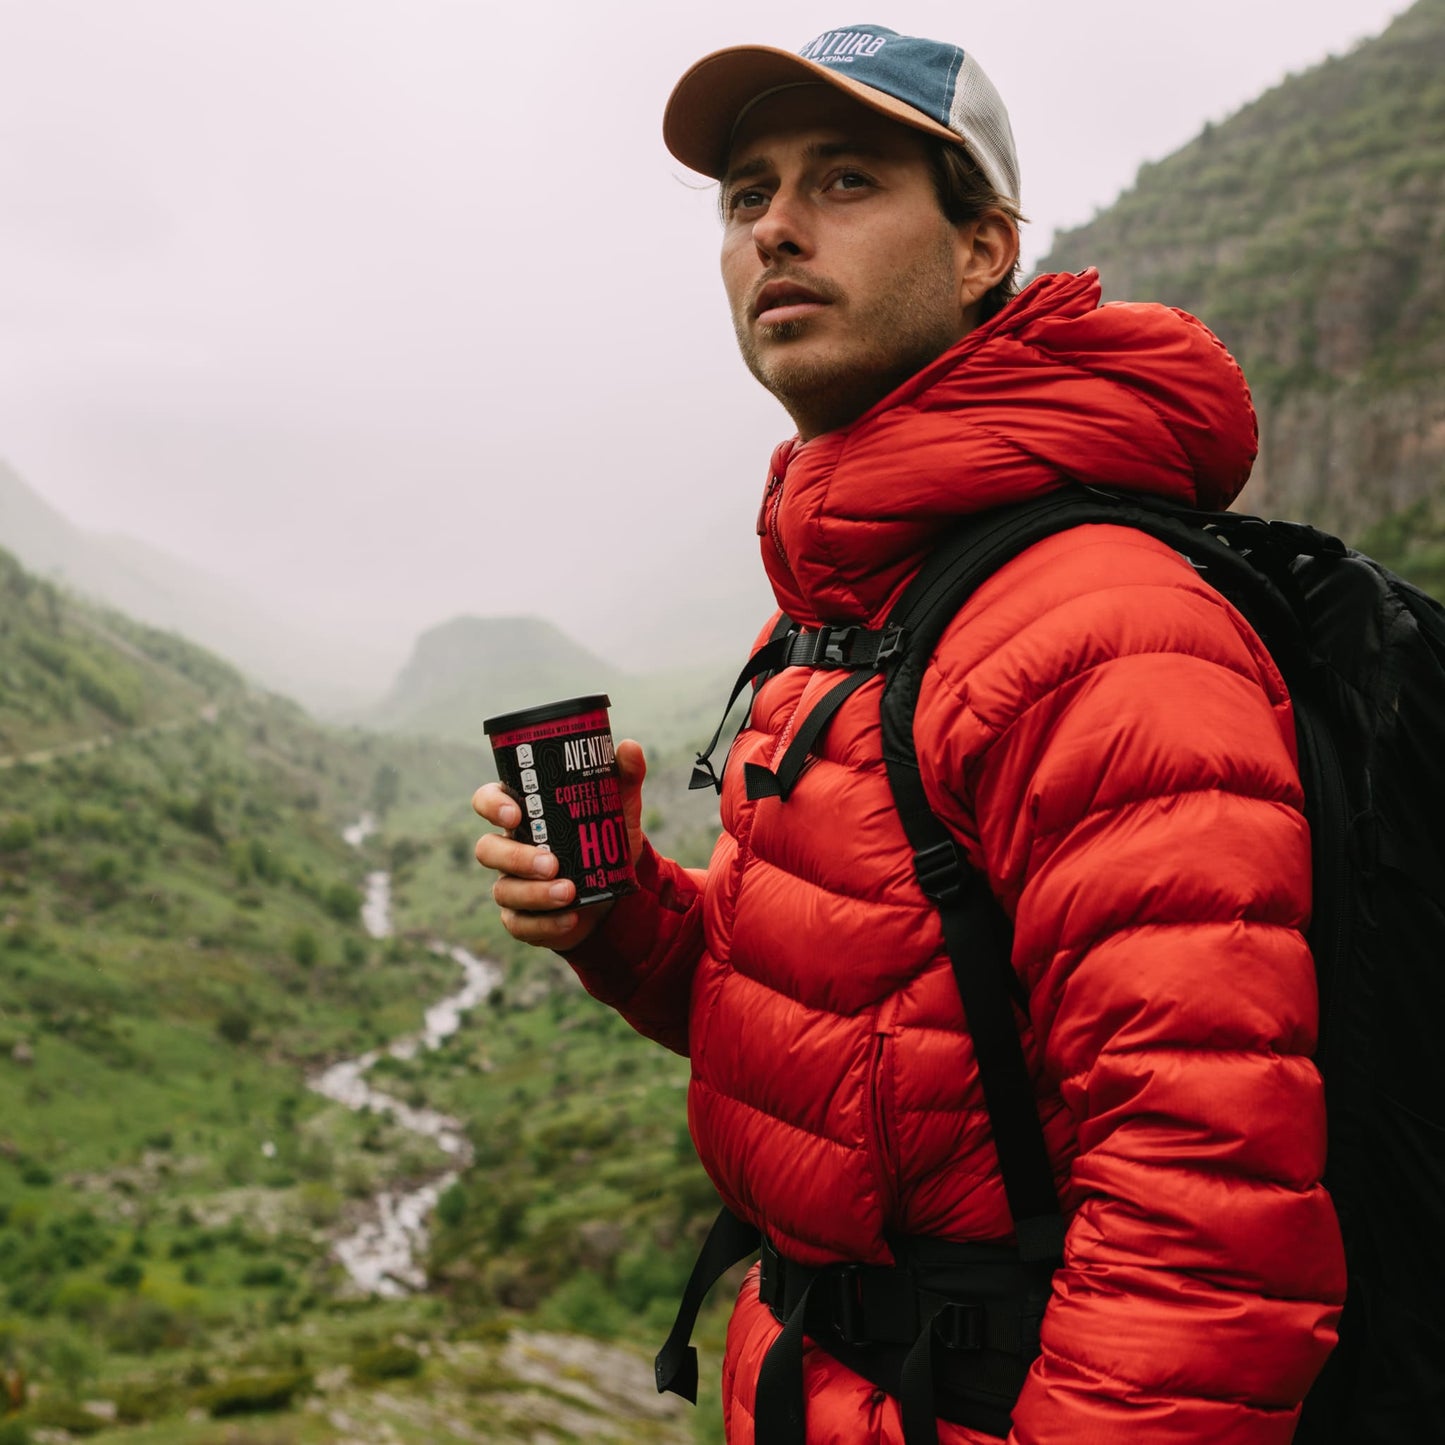 Aventura Self Heating Chocolate Drink Hot in 3 minutes being held by a person hiking in mountains.